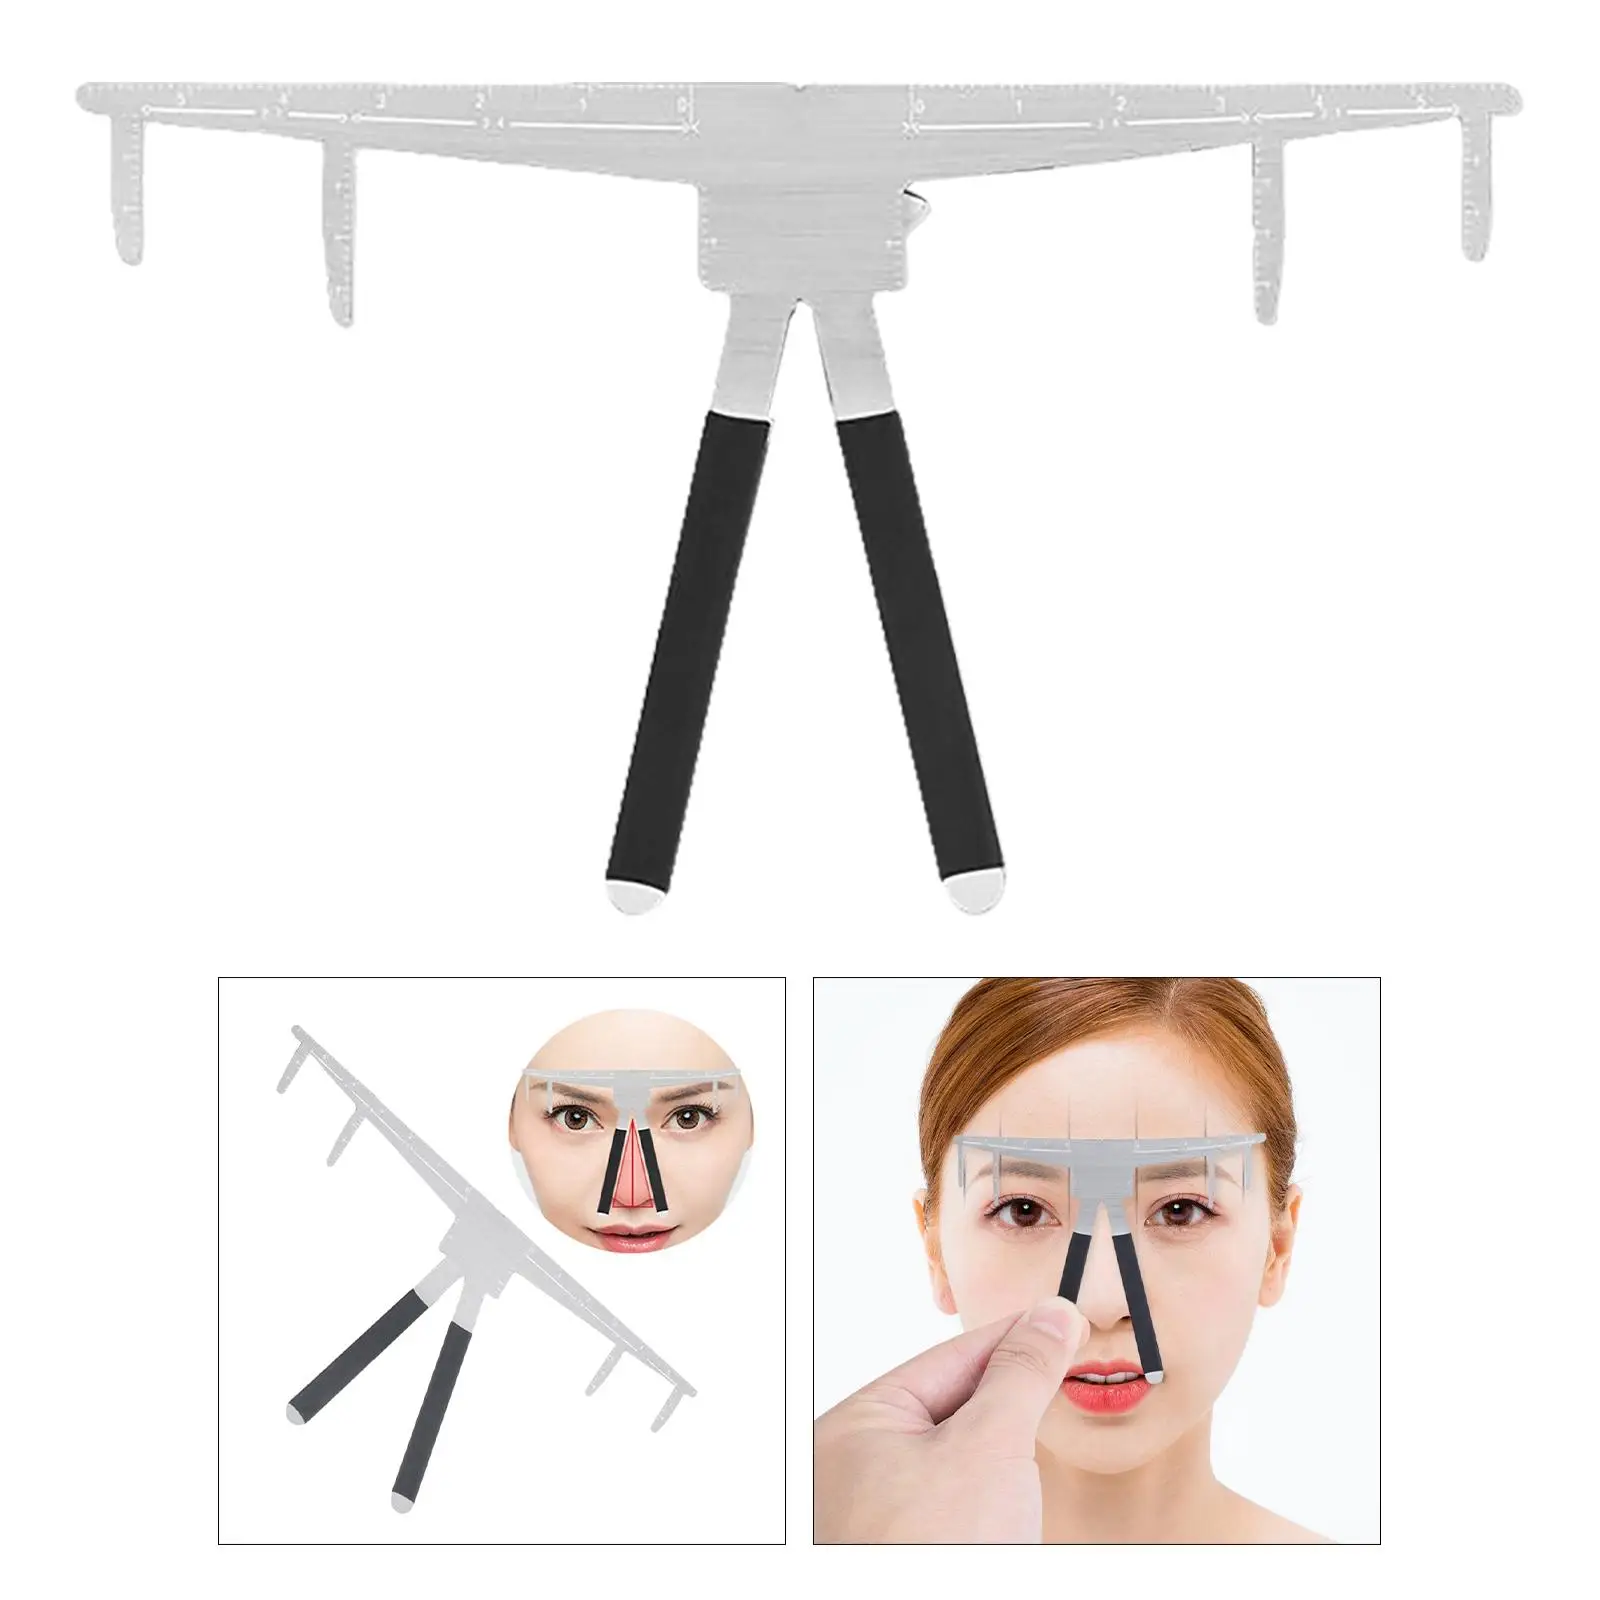 Eyebrow Ruler Three-Point Positioning Grooming Stencil Tool Shaper Gold Ratio Accessories Corrector Eyebrow Shaping for Eyebrow